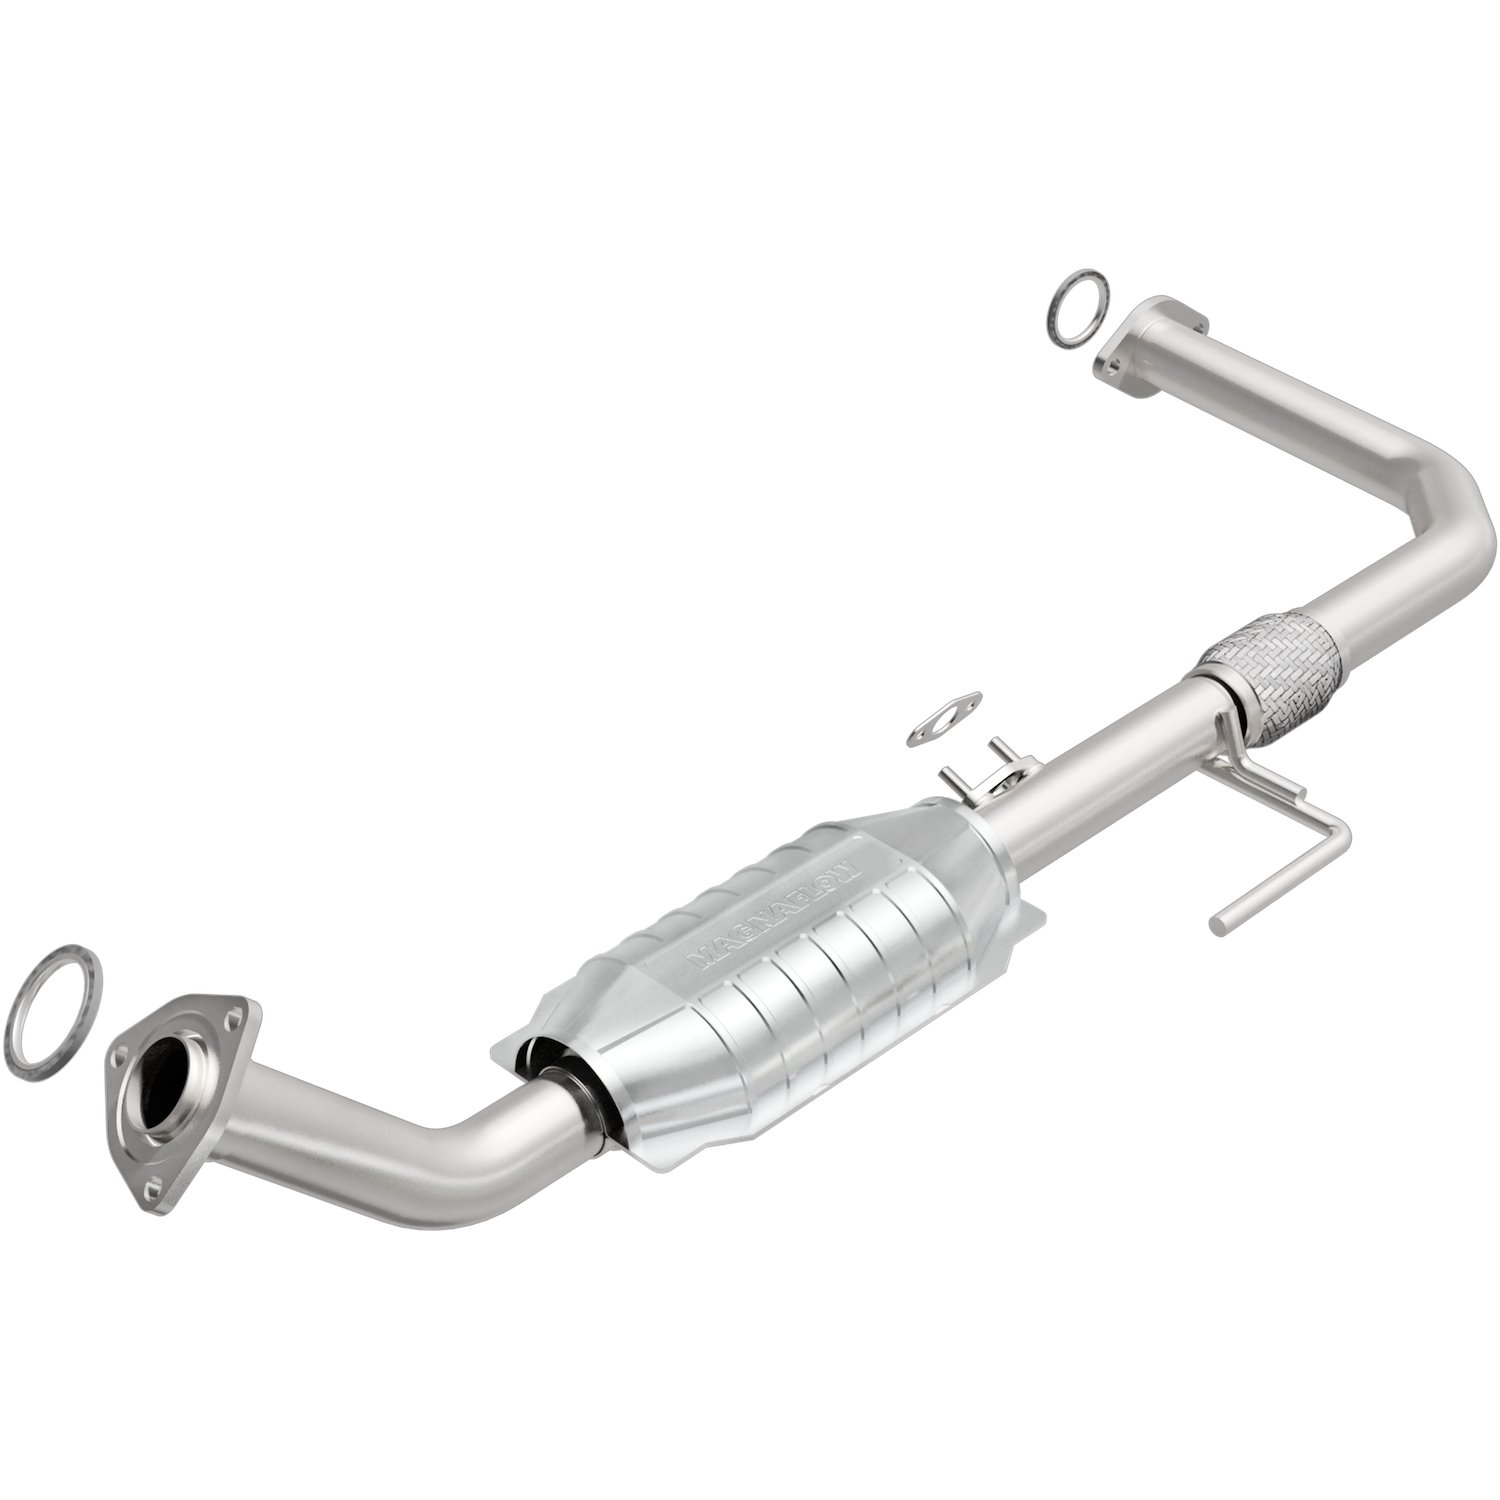 2000-2002 Toyota Tundra OEM Grade Federal / EPA Compliant Direct-Fit Catalytic Converter